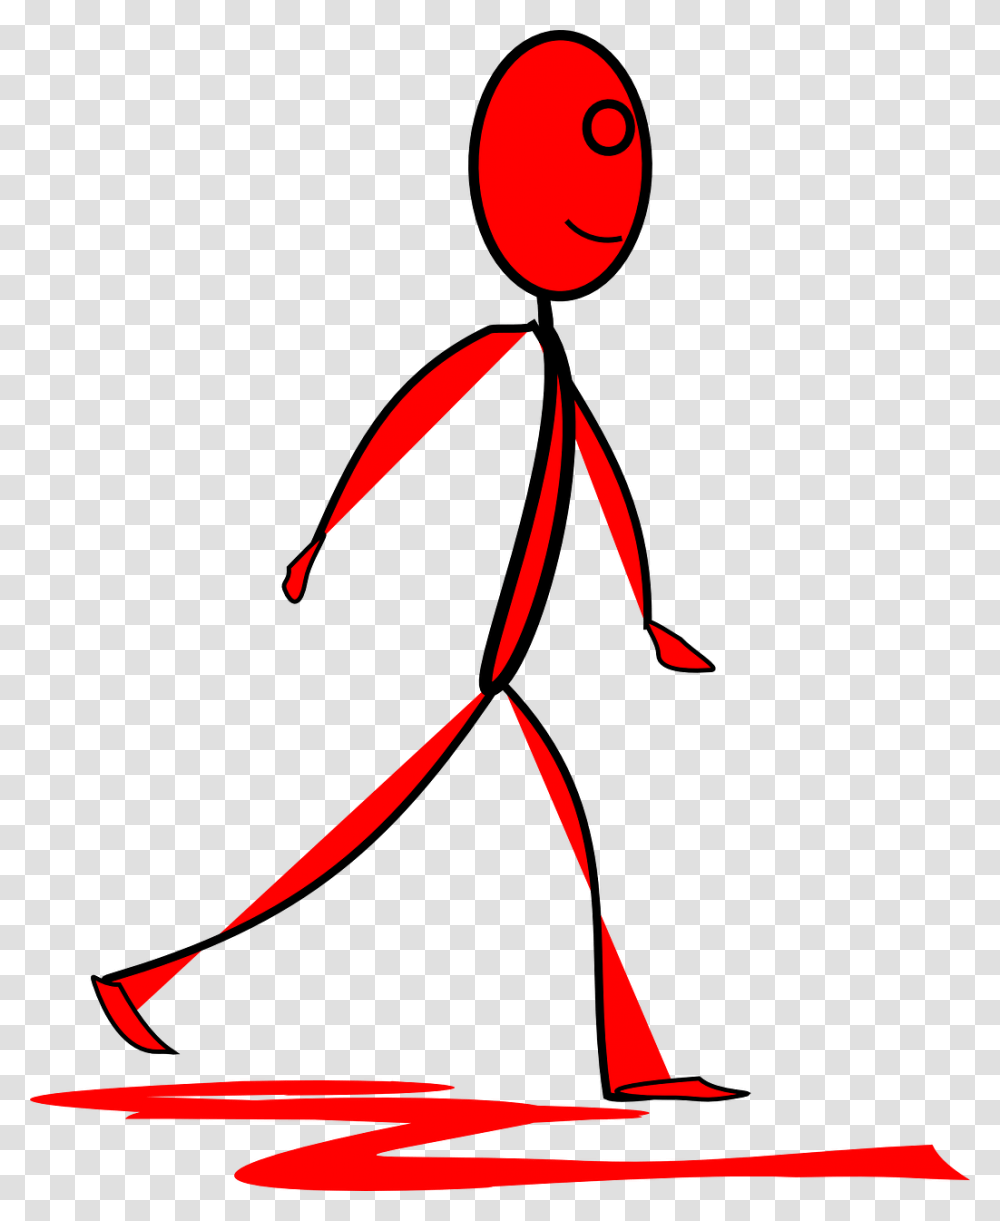 Stick Man Walking Clipart Red Stick Figure Guy, Outdoors, Nature, Mountain Transparent Png